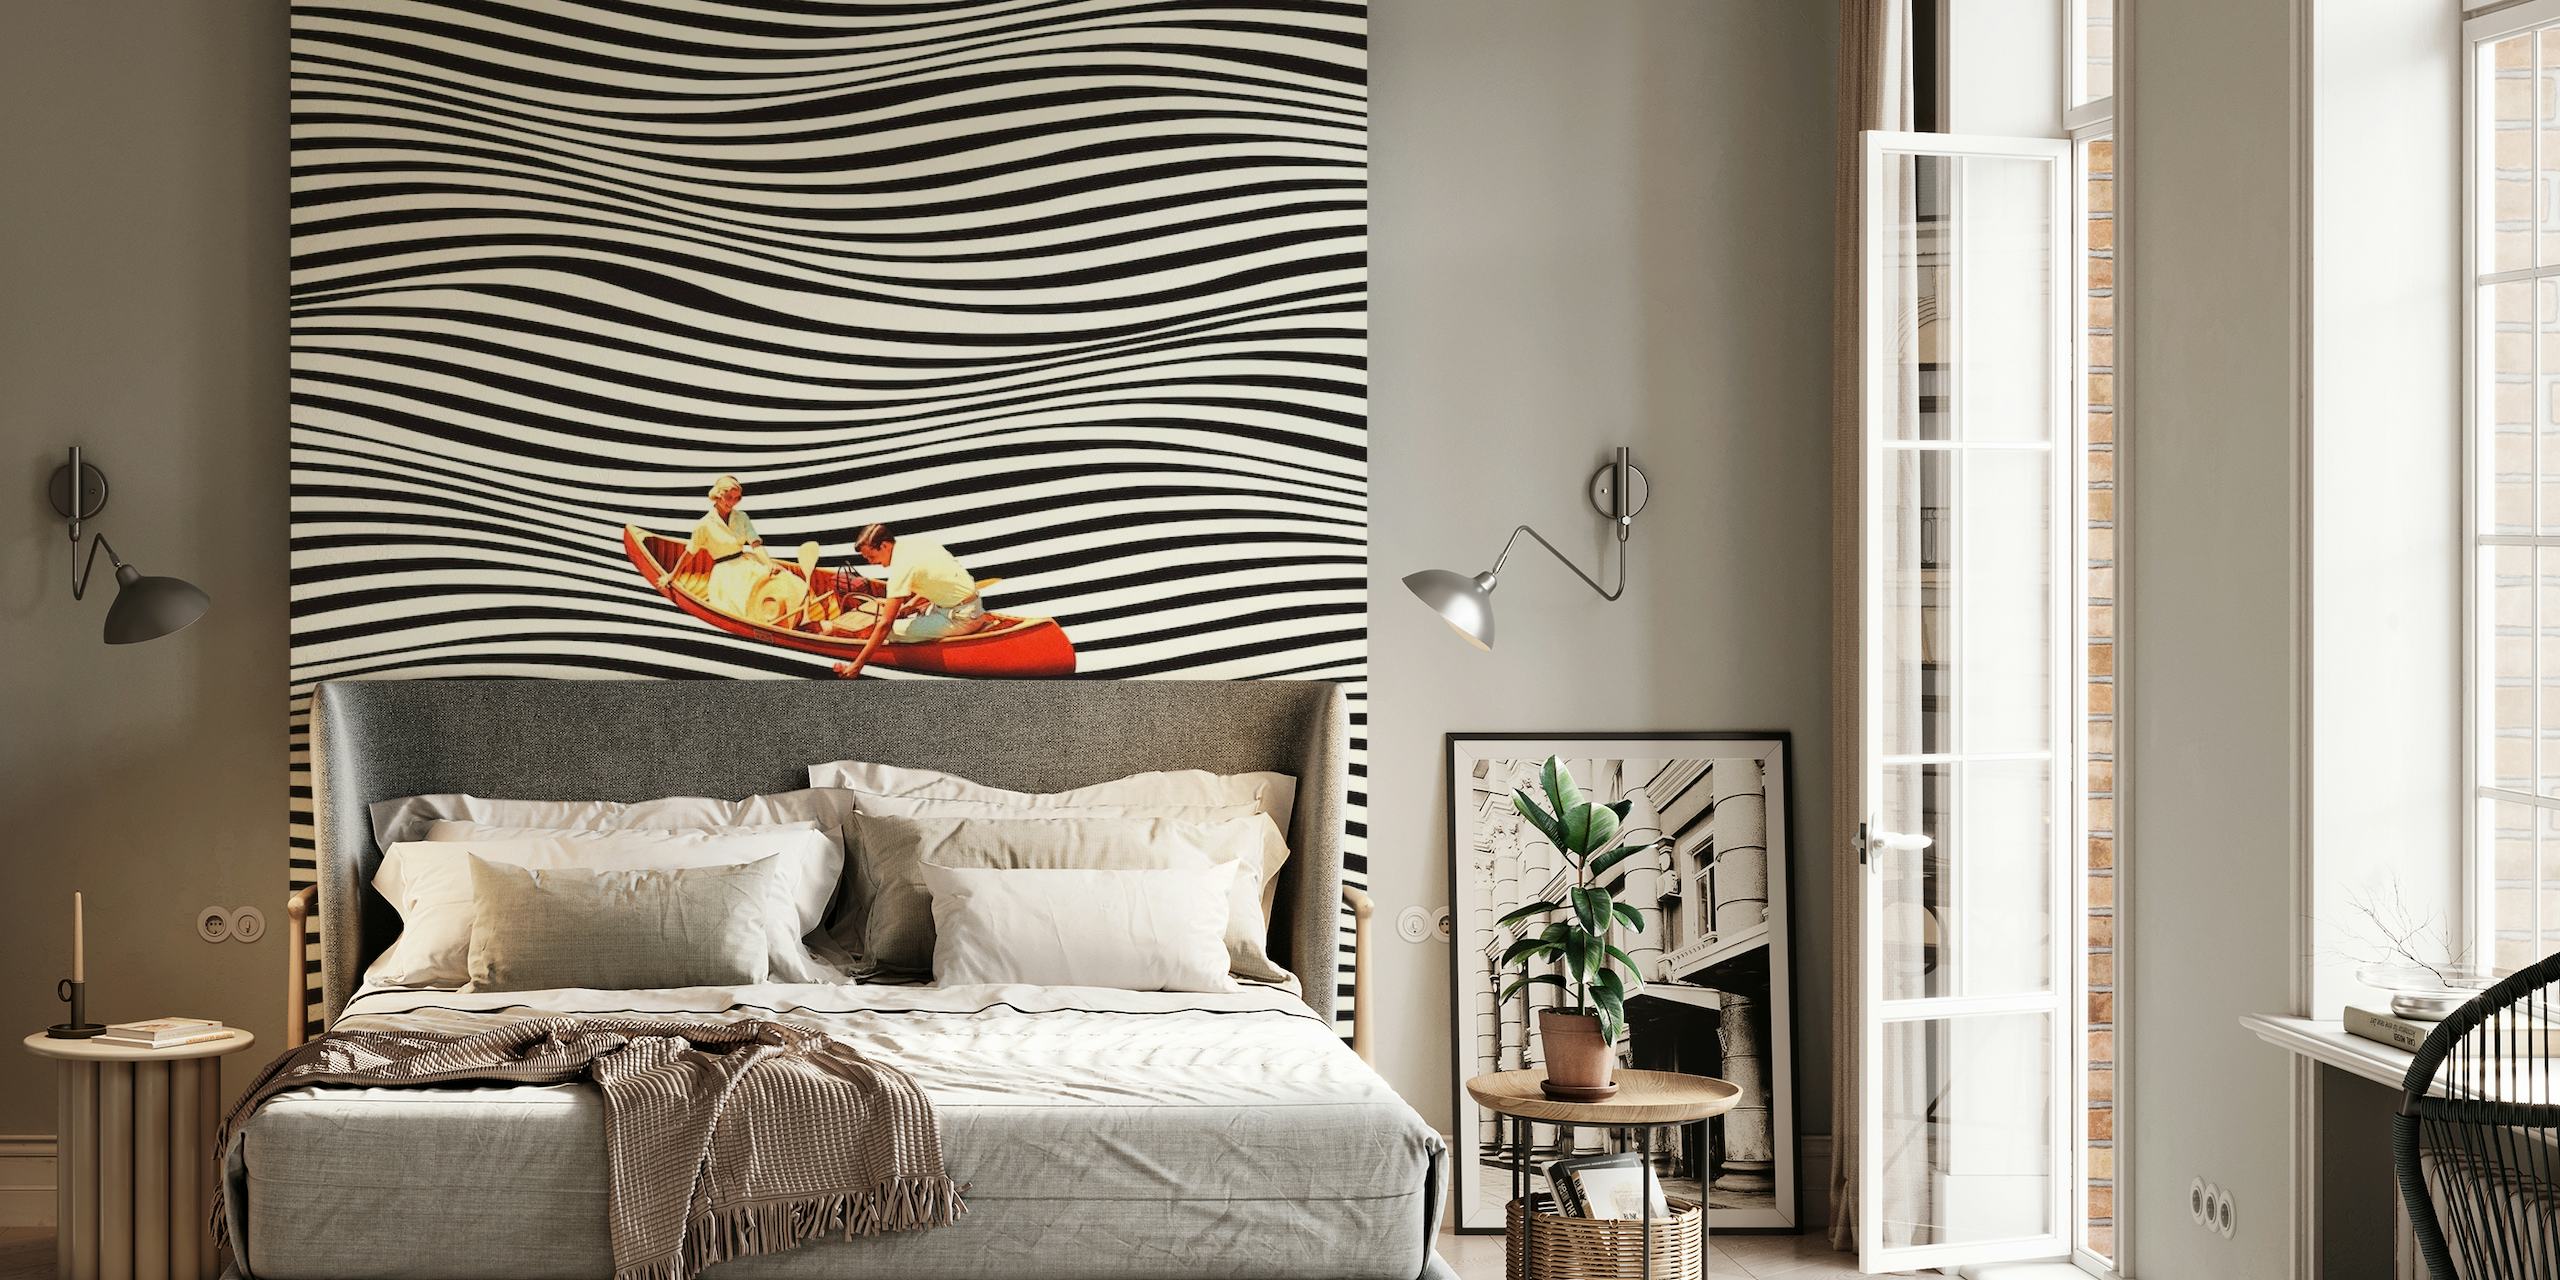 A red boat on a sea of black and white illusion waves wall mural